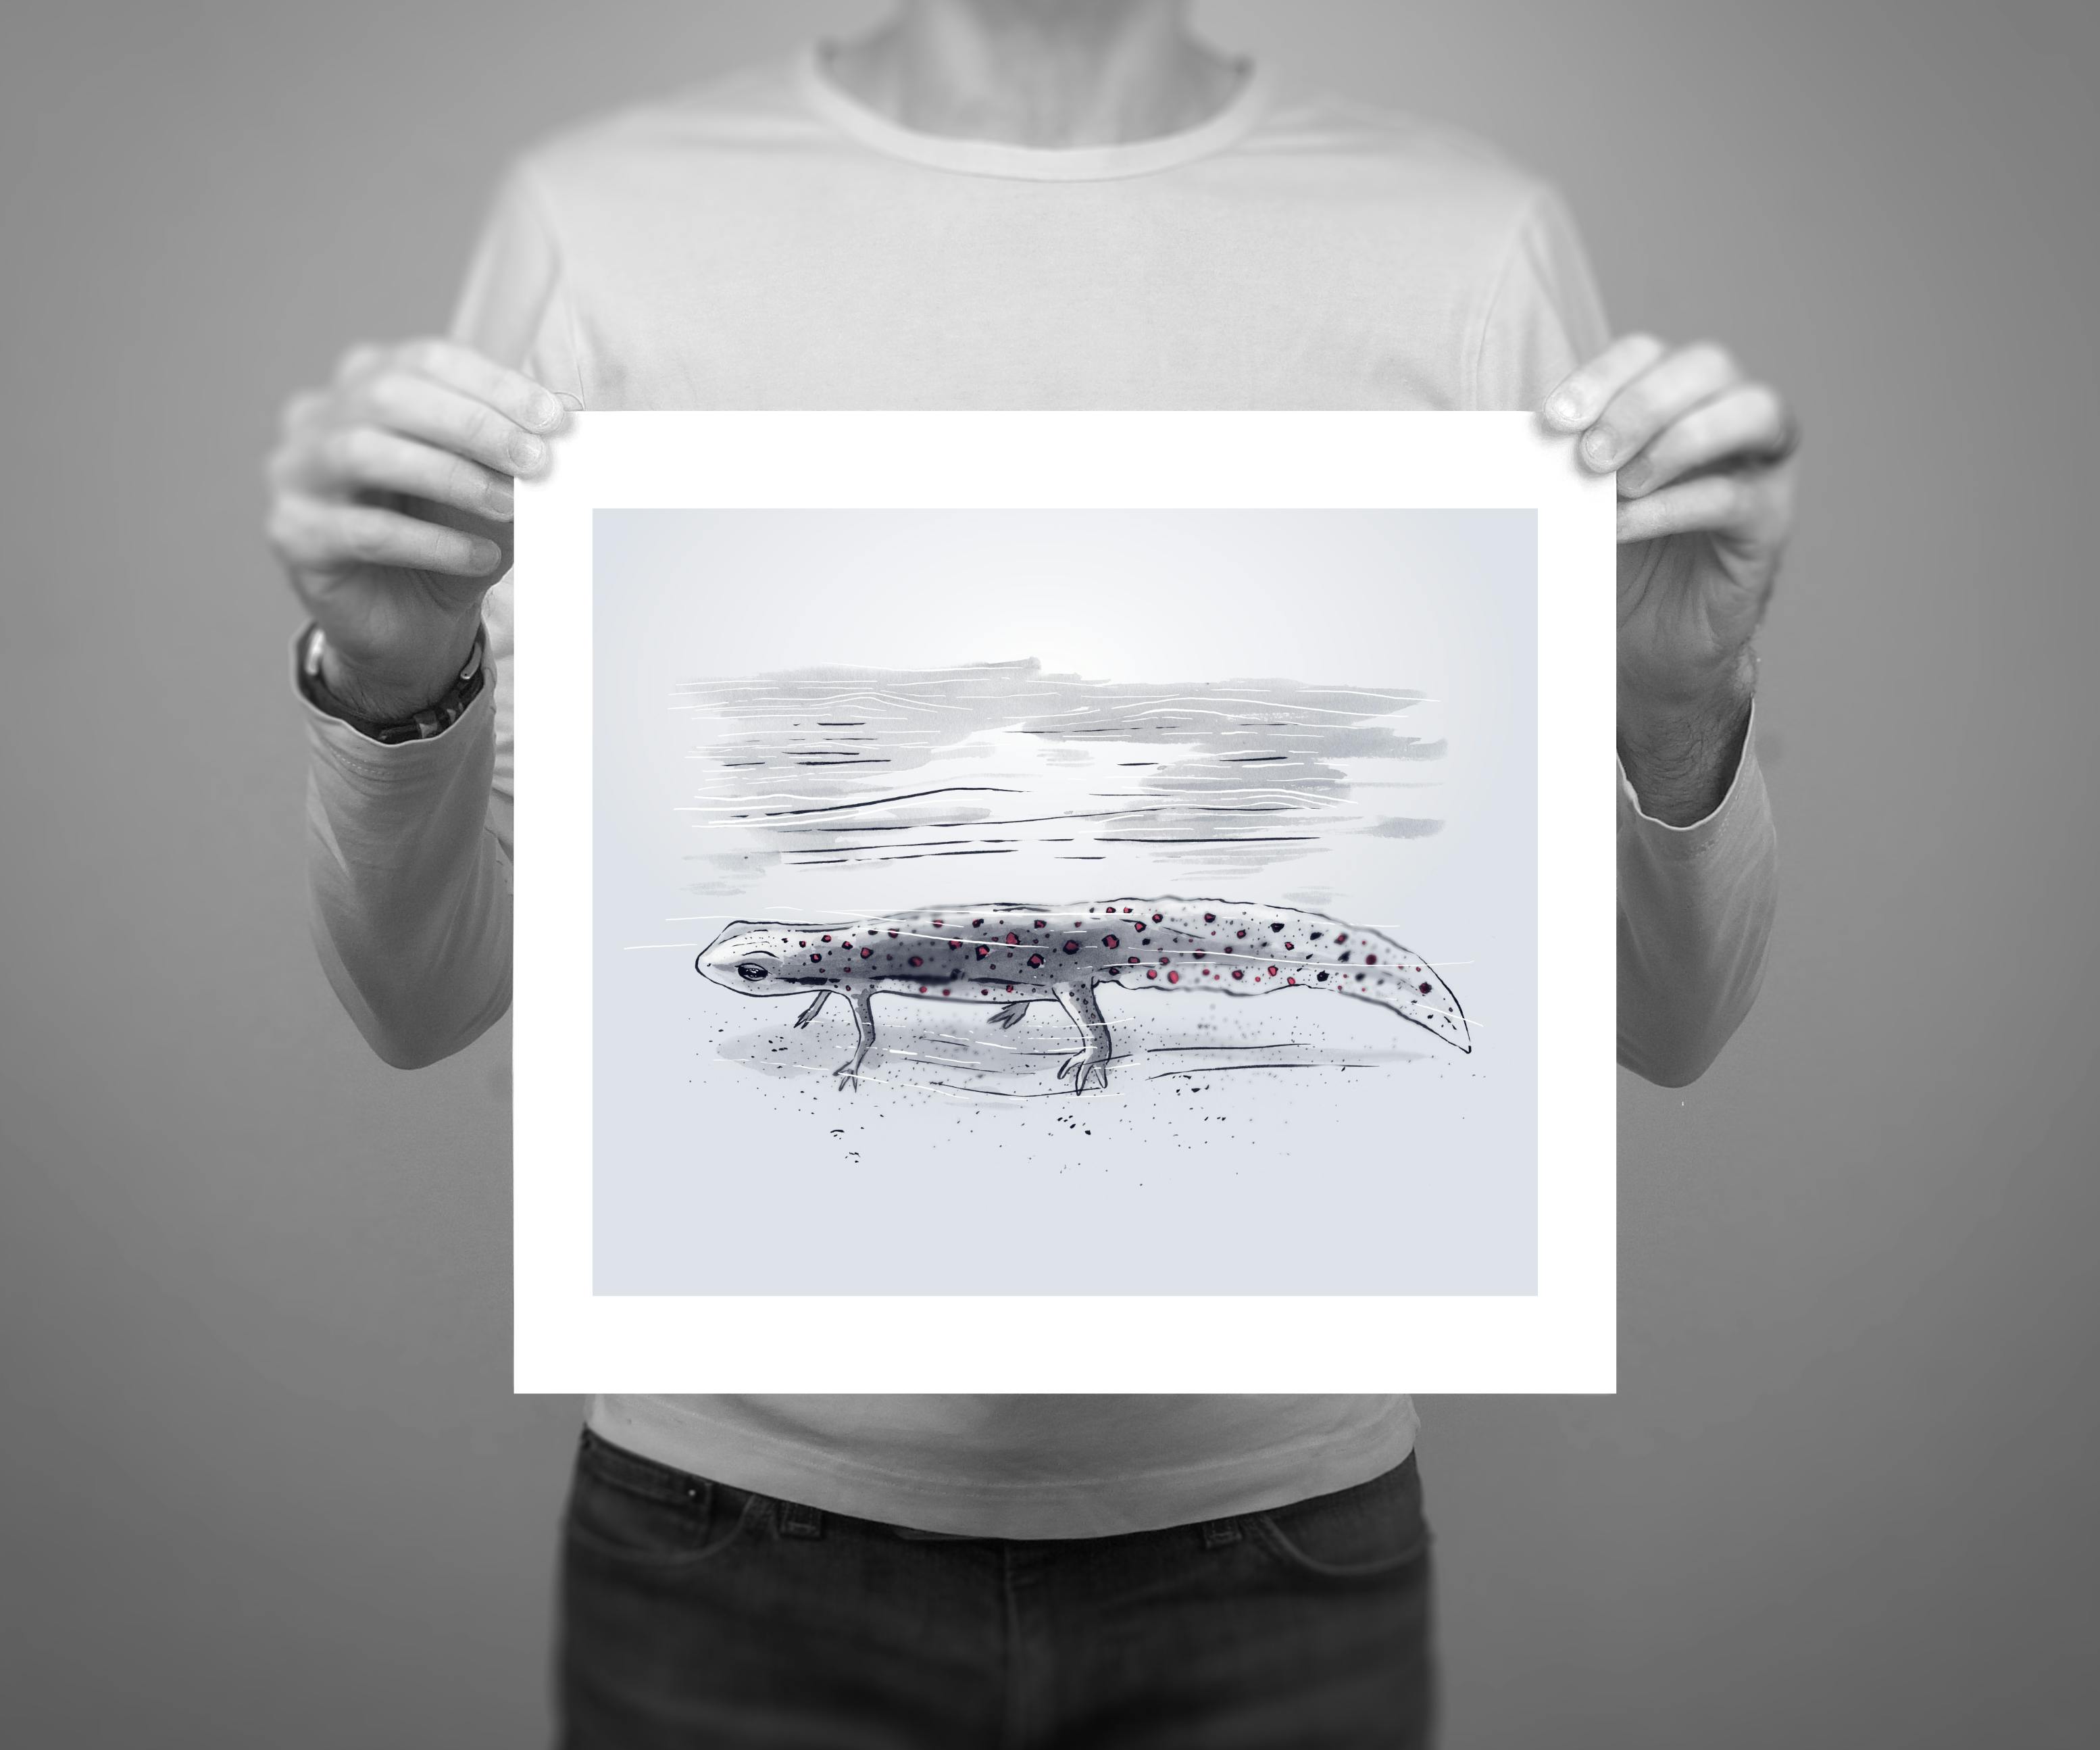 10 x 8” giclee edition of “Newt” from the Patapsco illustration series